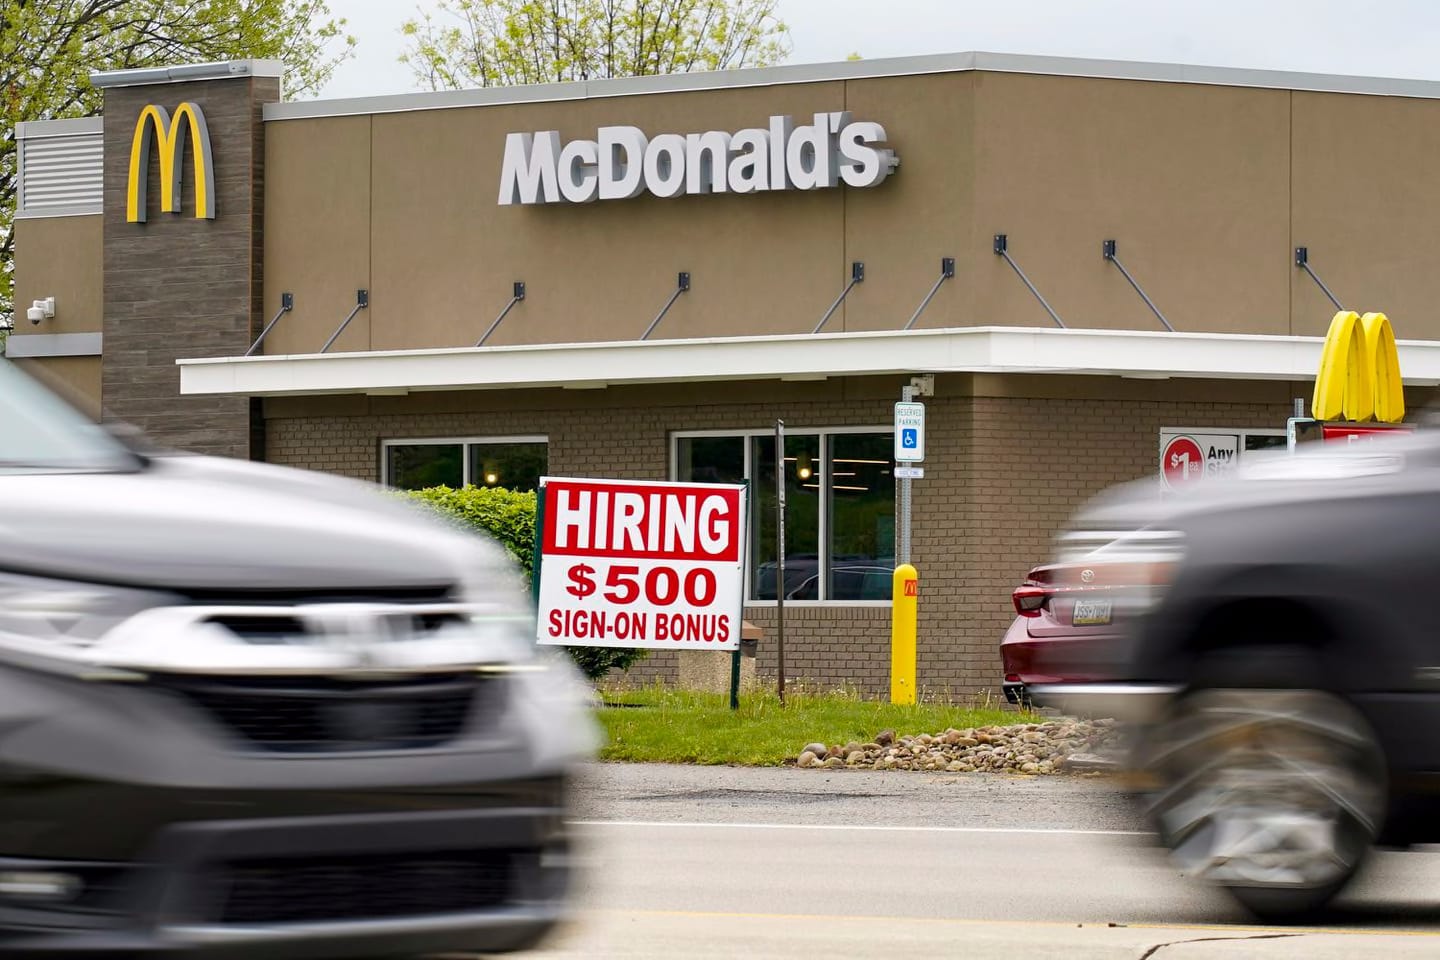 A hiring sign offered a $500 bonus outside a McDonald's restaurant, in Cranberry Township, Butler County, Pa. on May 5, 2021.